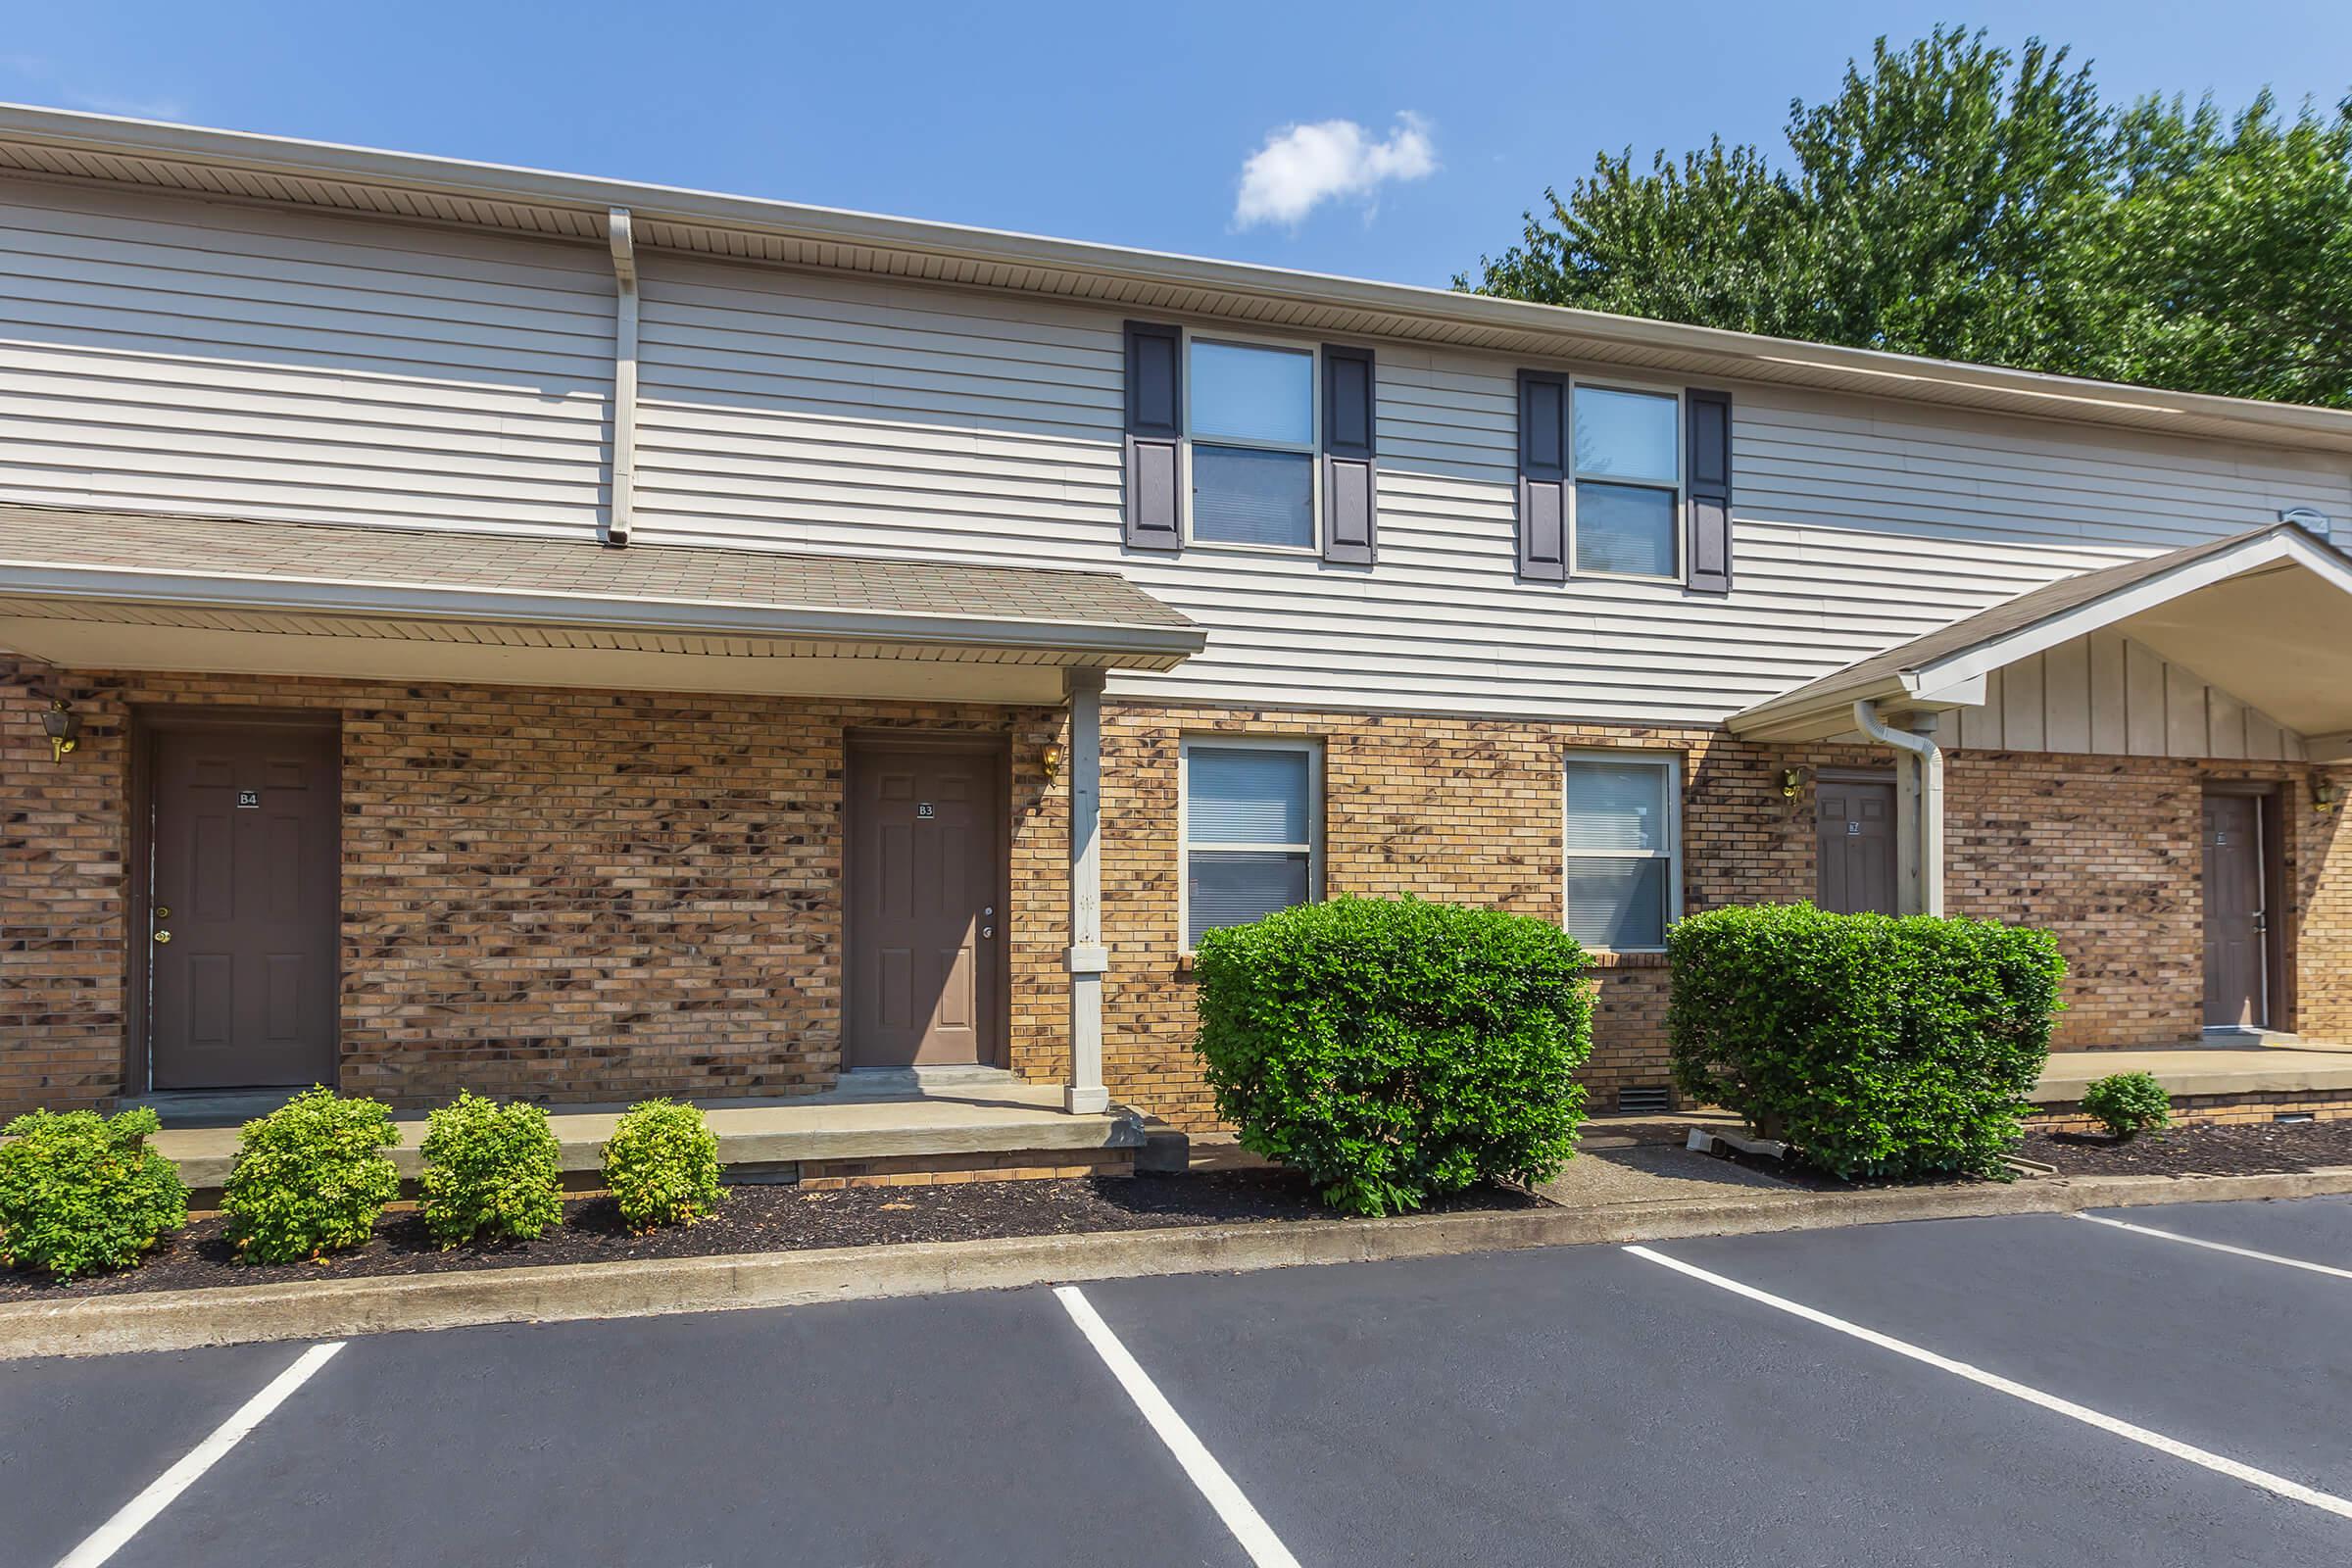 Make yourself at home here at The Residences at 1671 Campbell in Clarksville, Tennessee